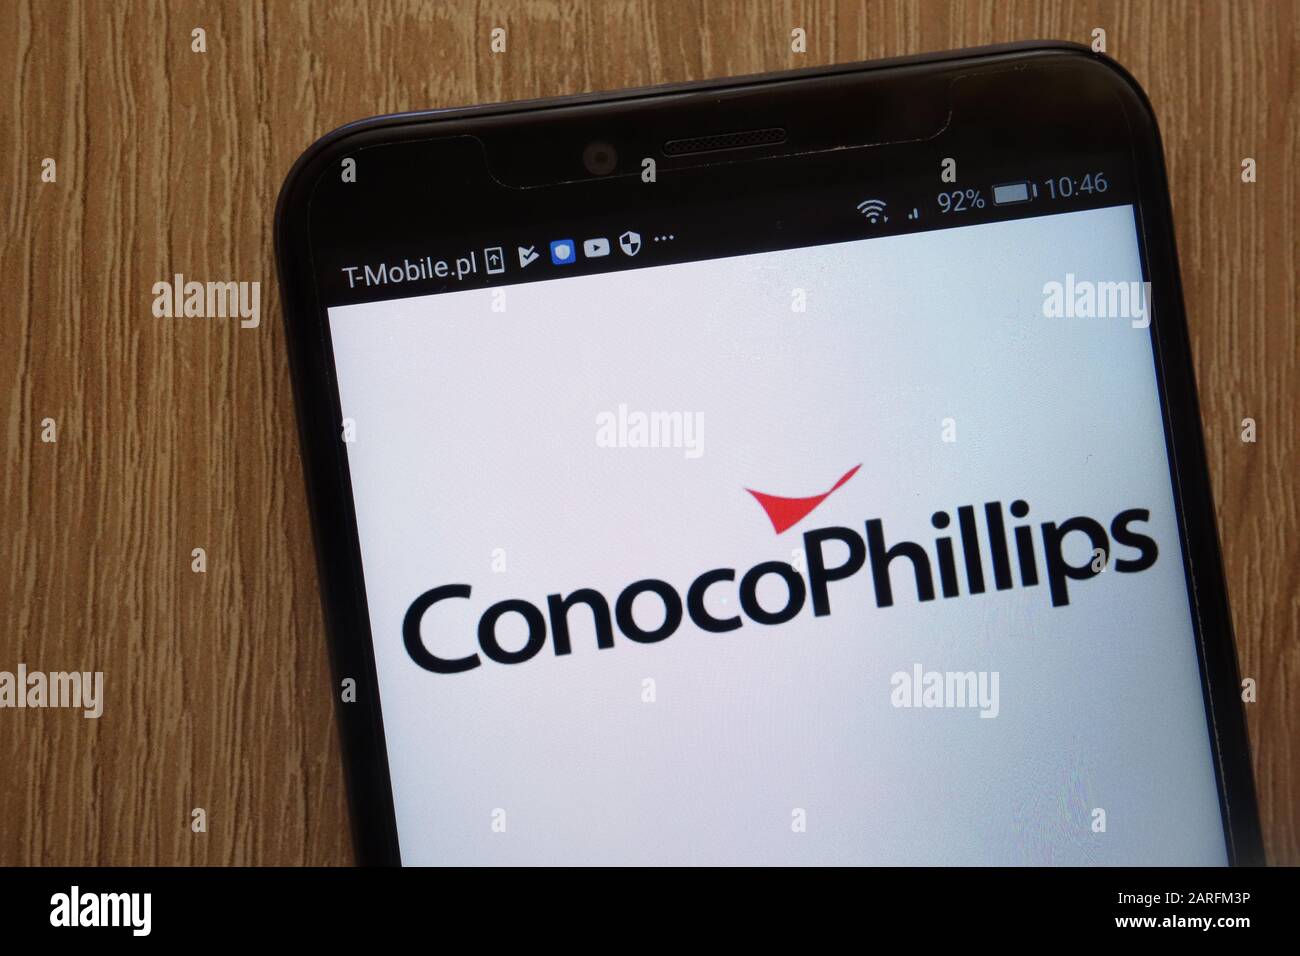 ConocoPhillips logo displayed on a modern smartphone Stock Photo